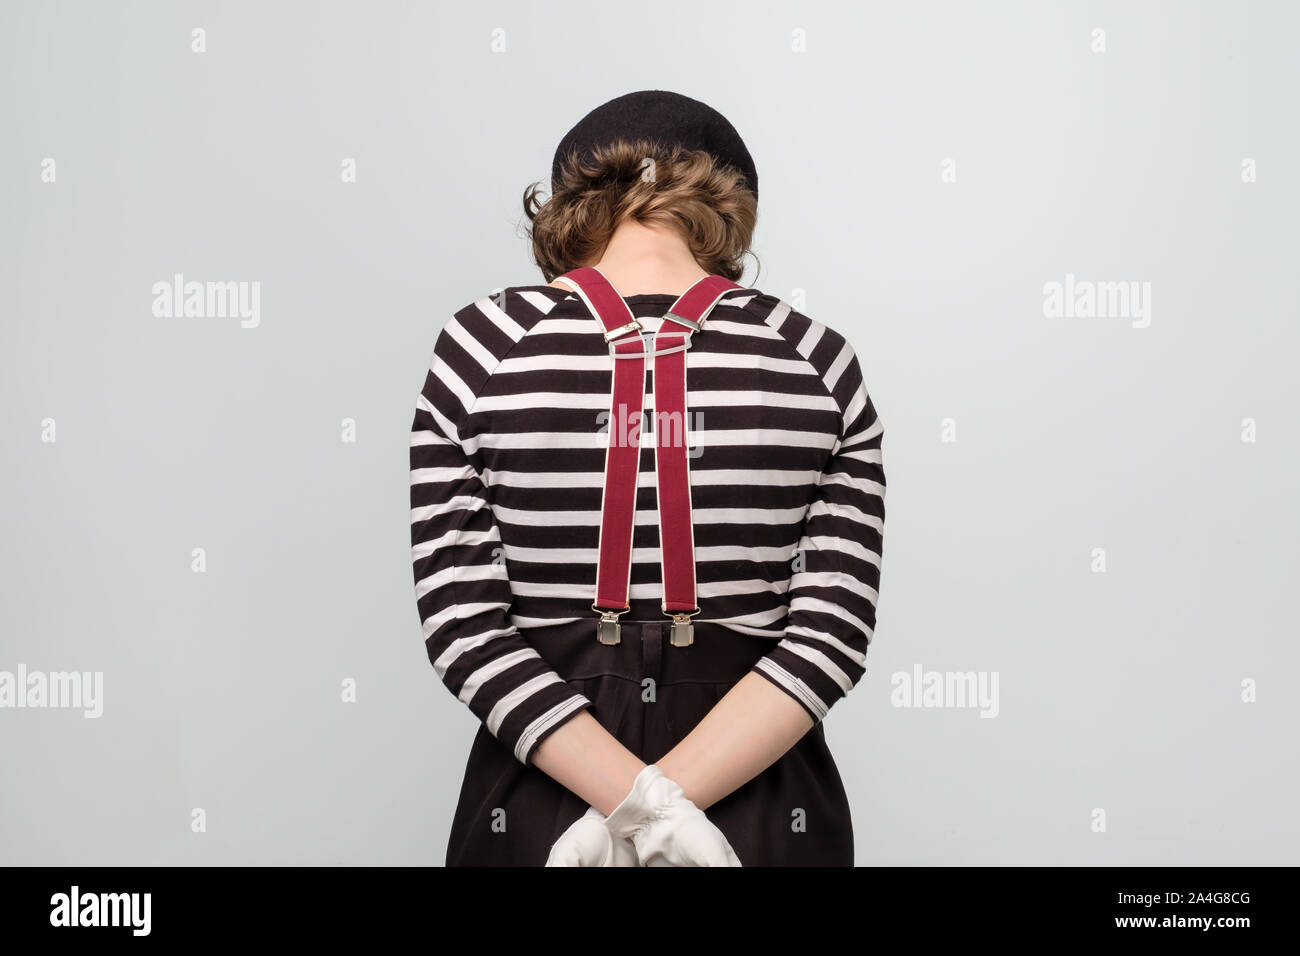 Sad young mime woman turning back being offended. Stock Photo